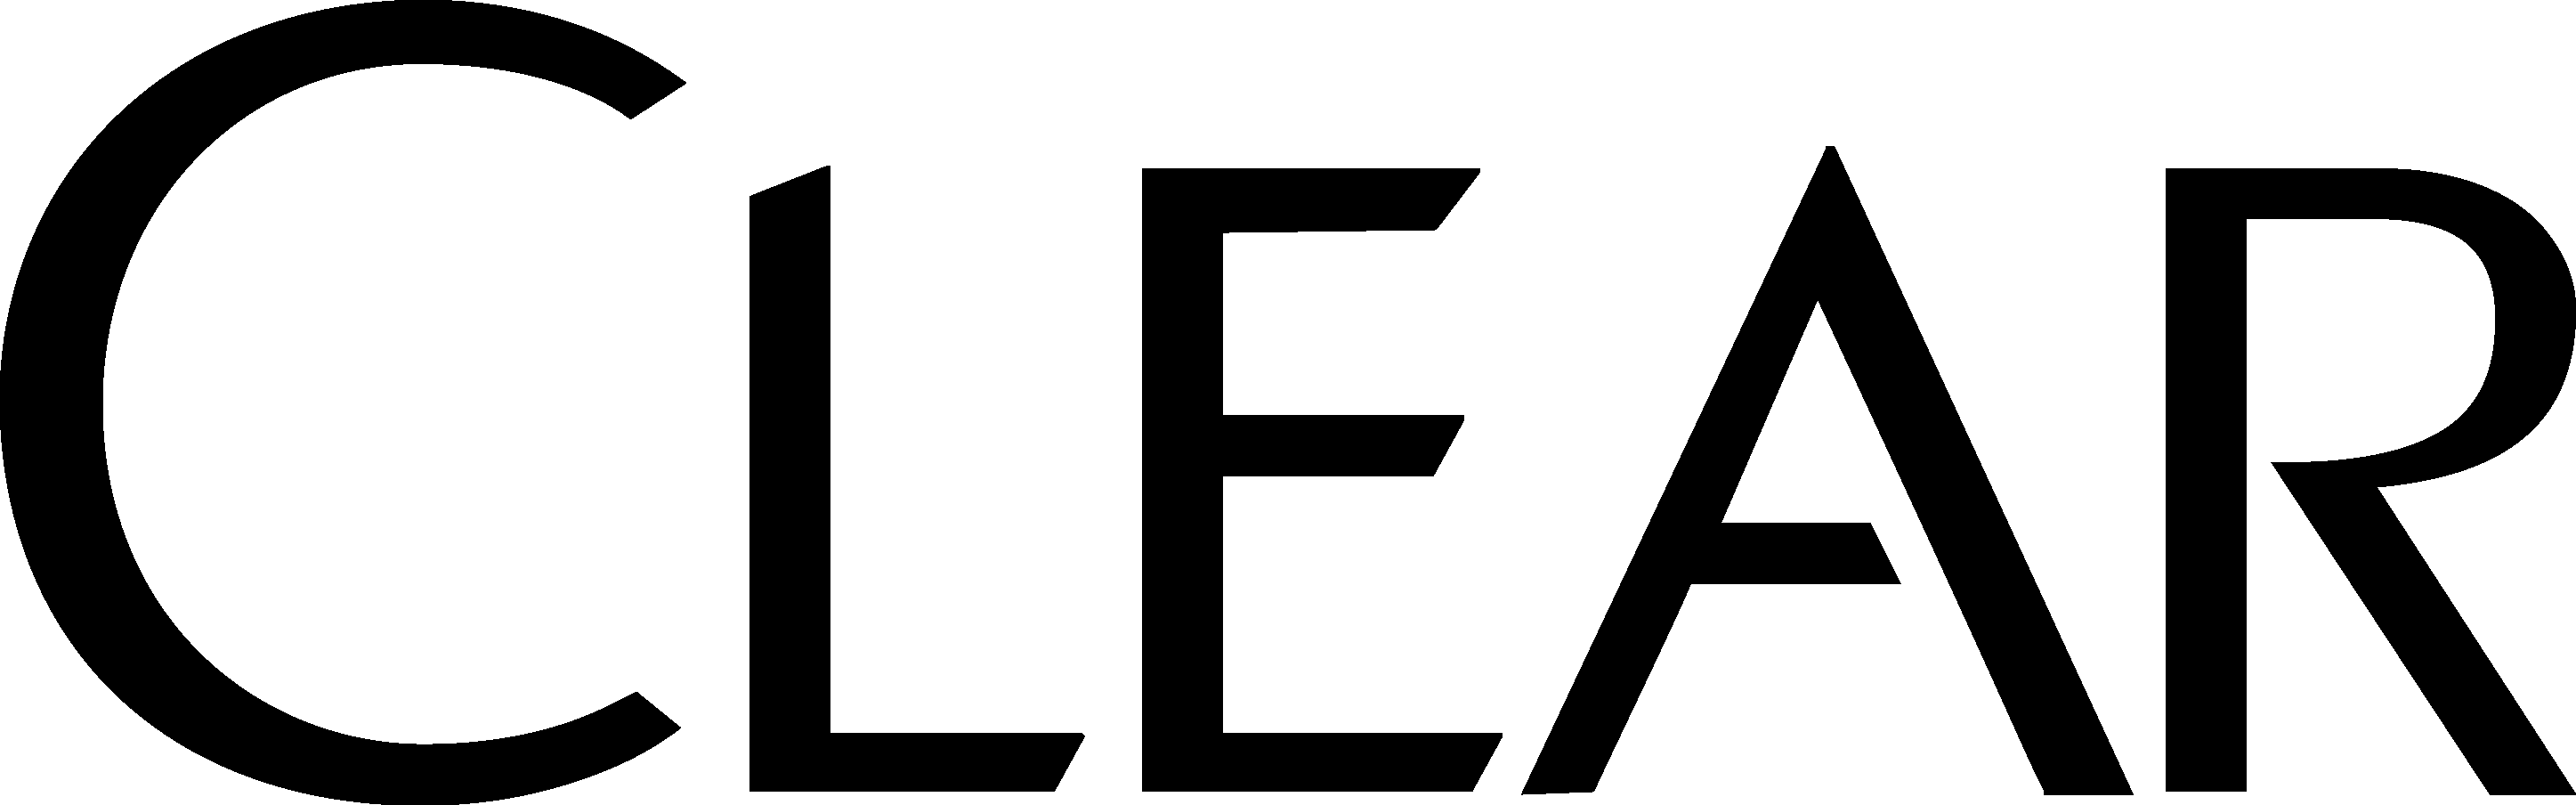 Clear Logo png